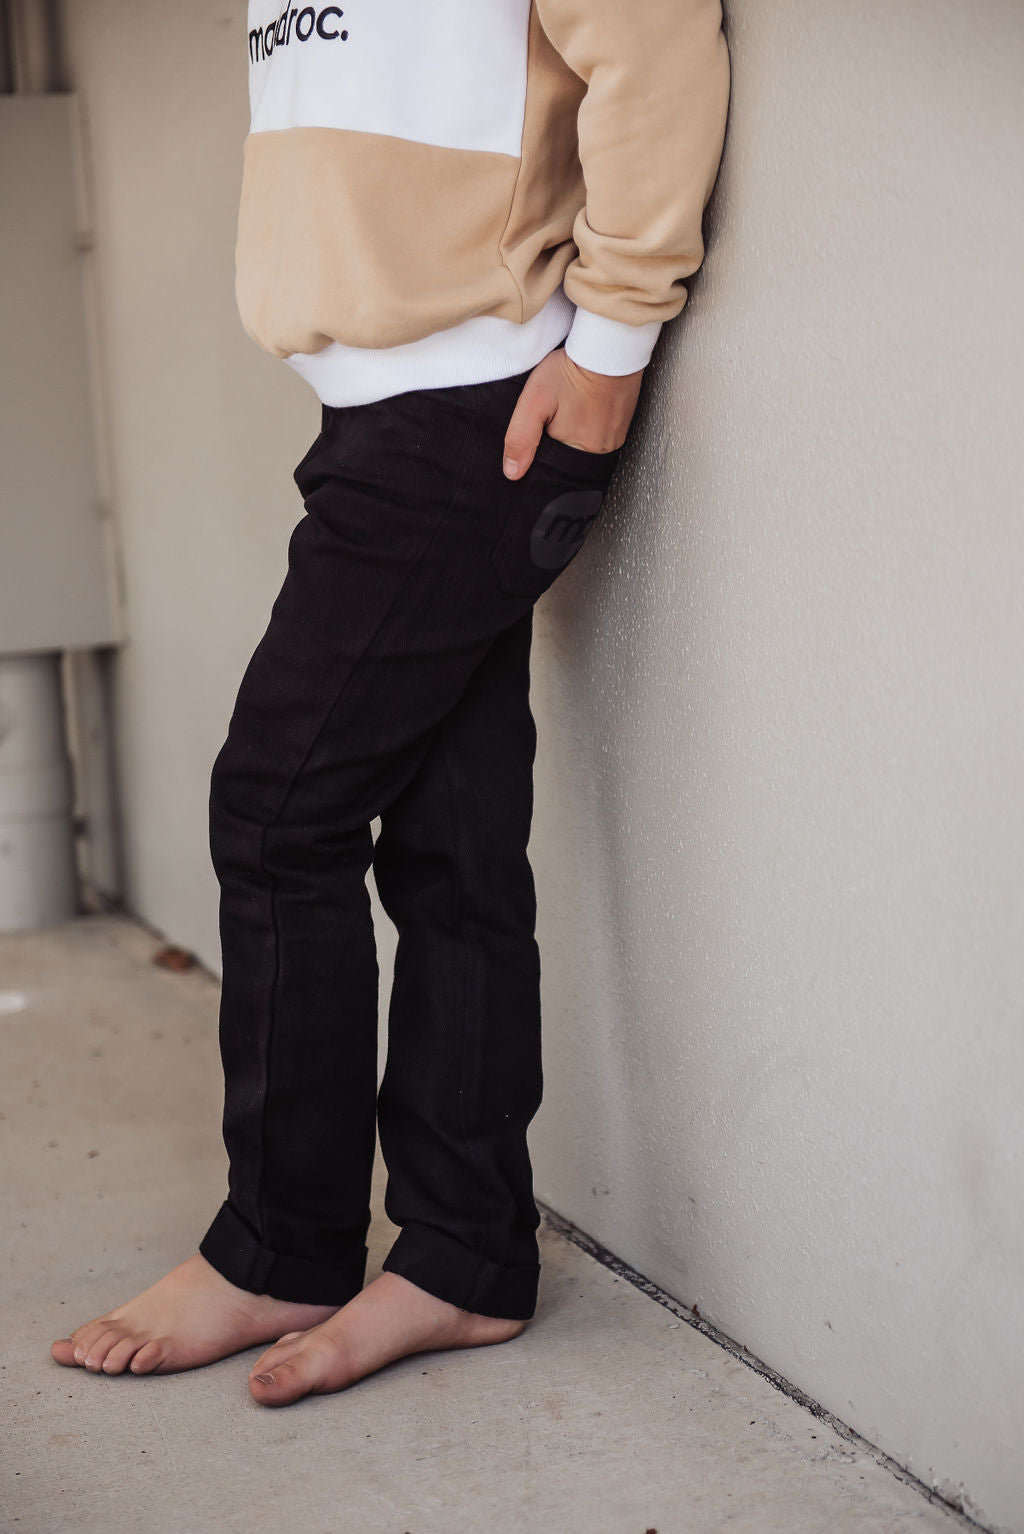 Relaxed Pants - Black